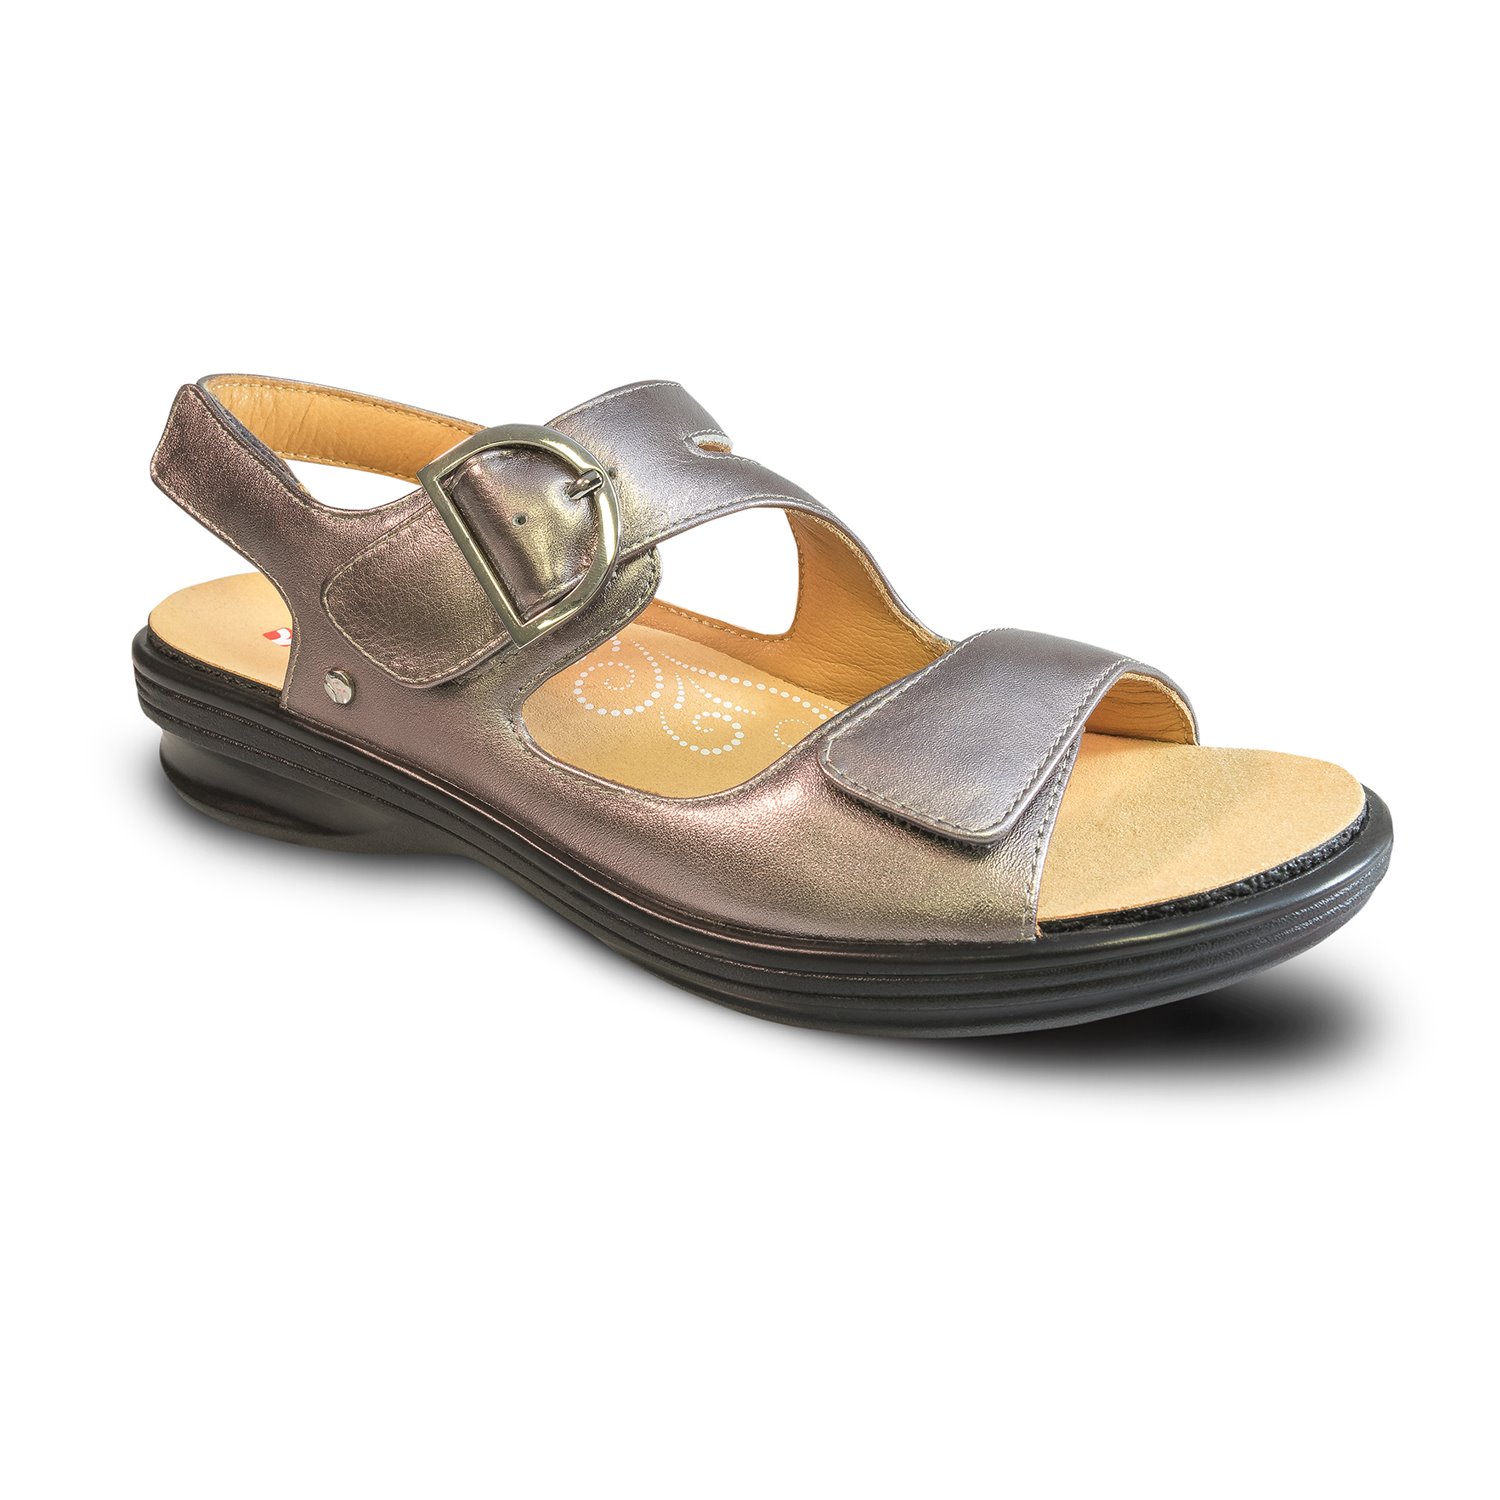 women's sandals with removable insoles for orthotics